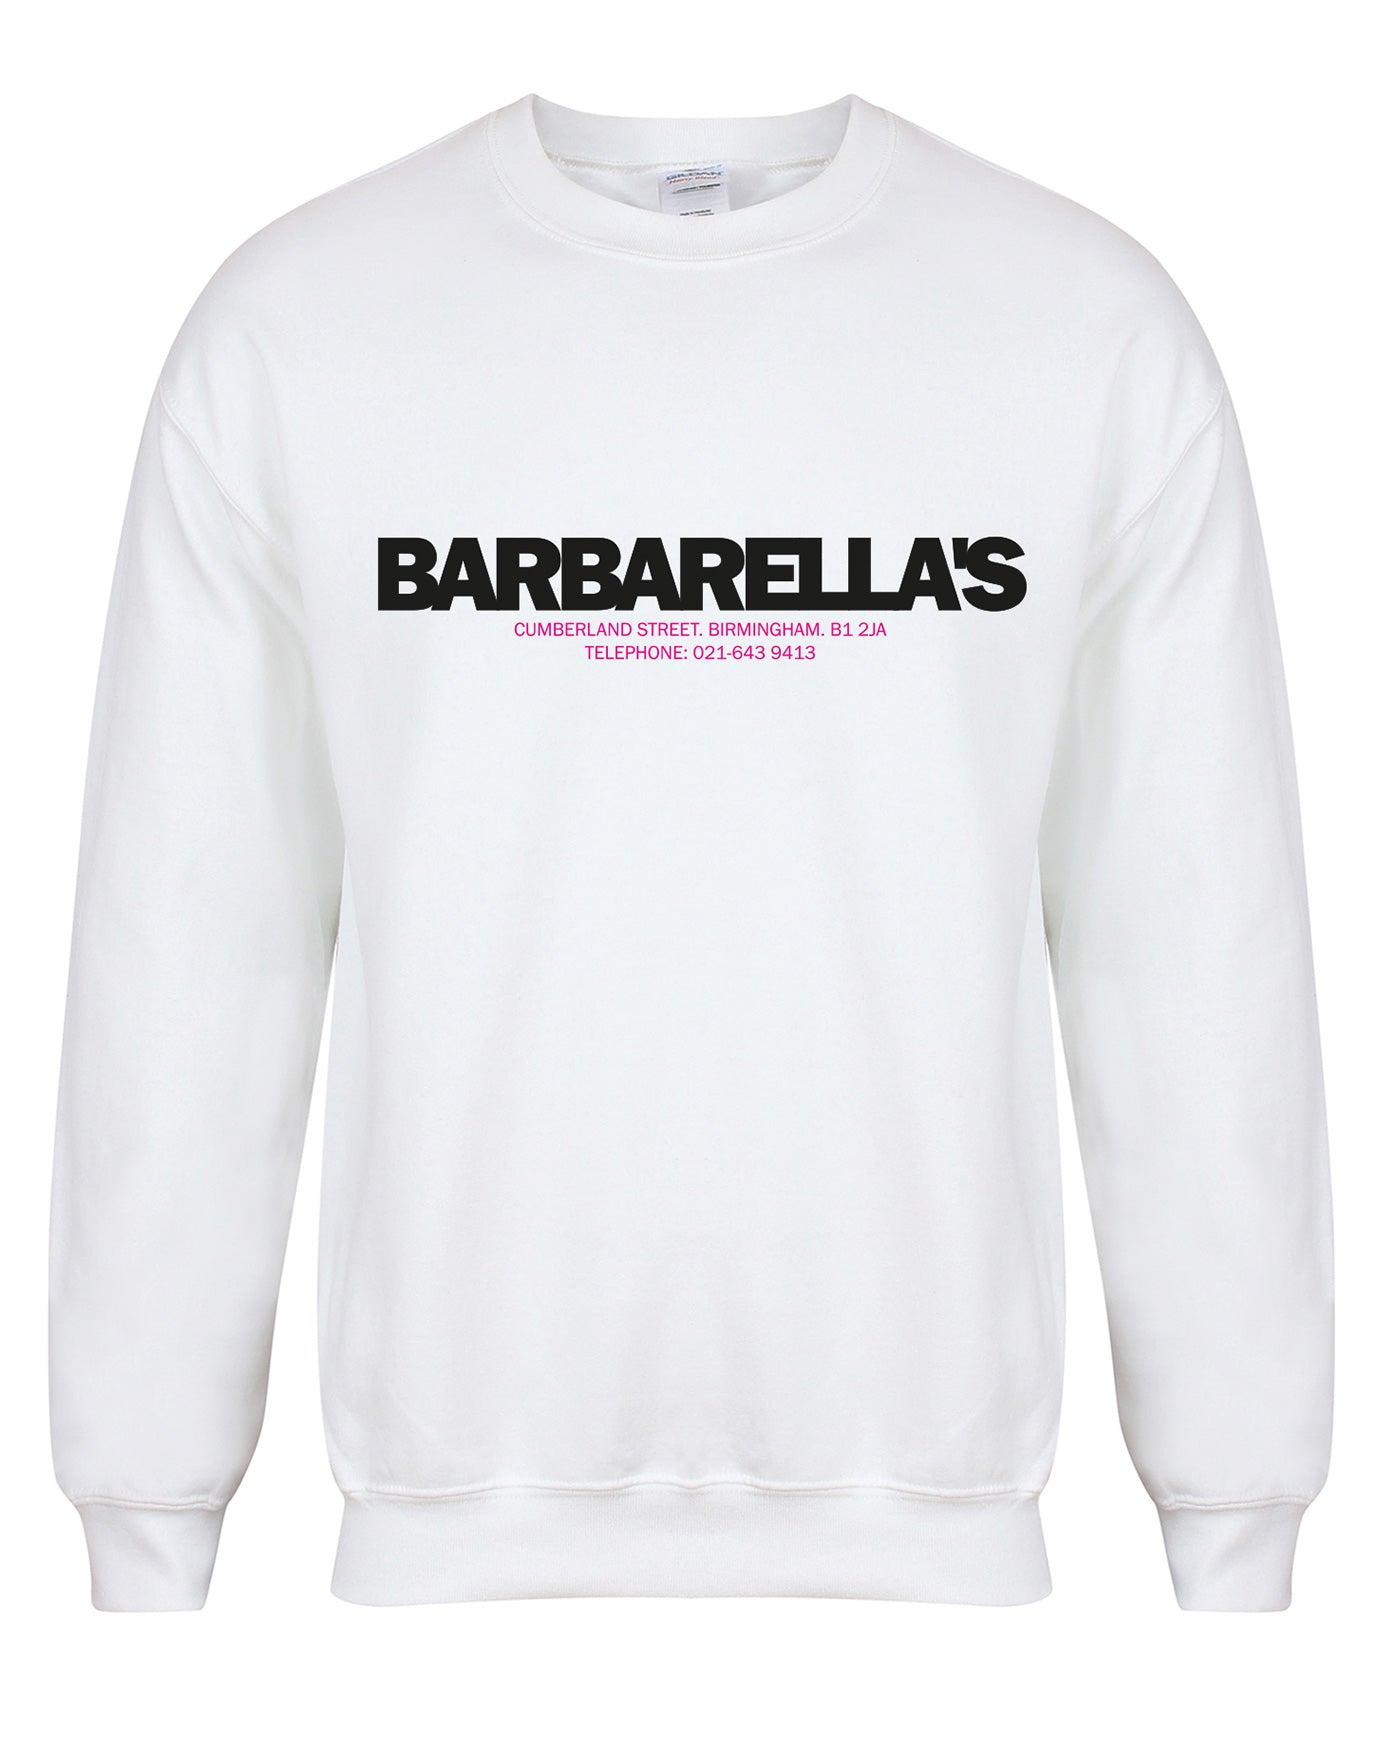 Barbarella's unisex fit sweatshirt - various colours - Dirty Stop Outs